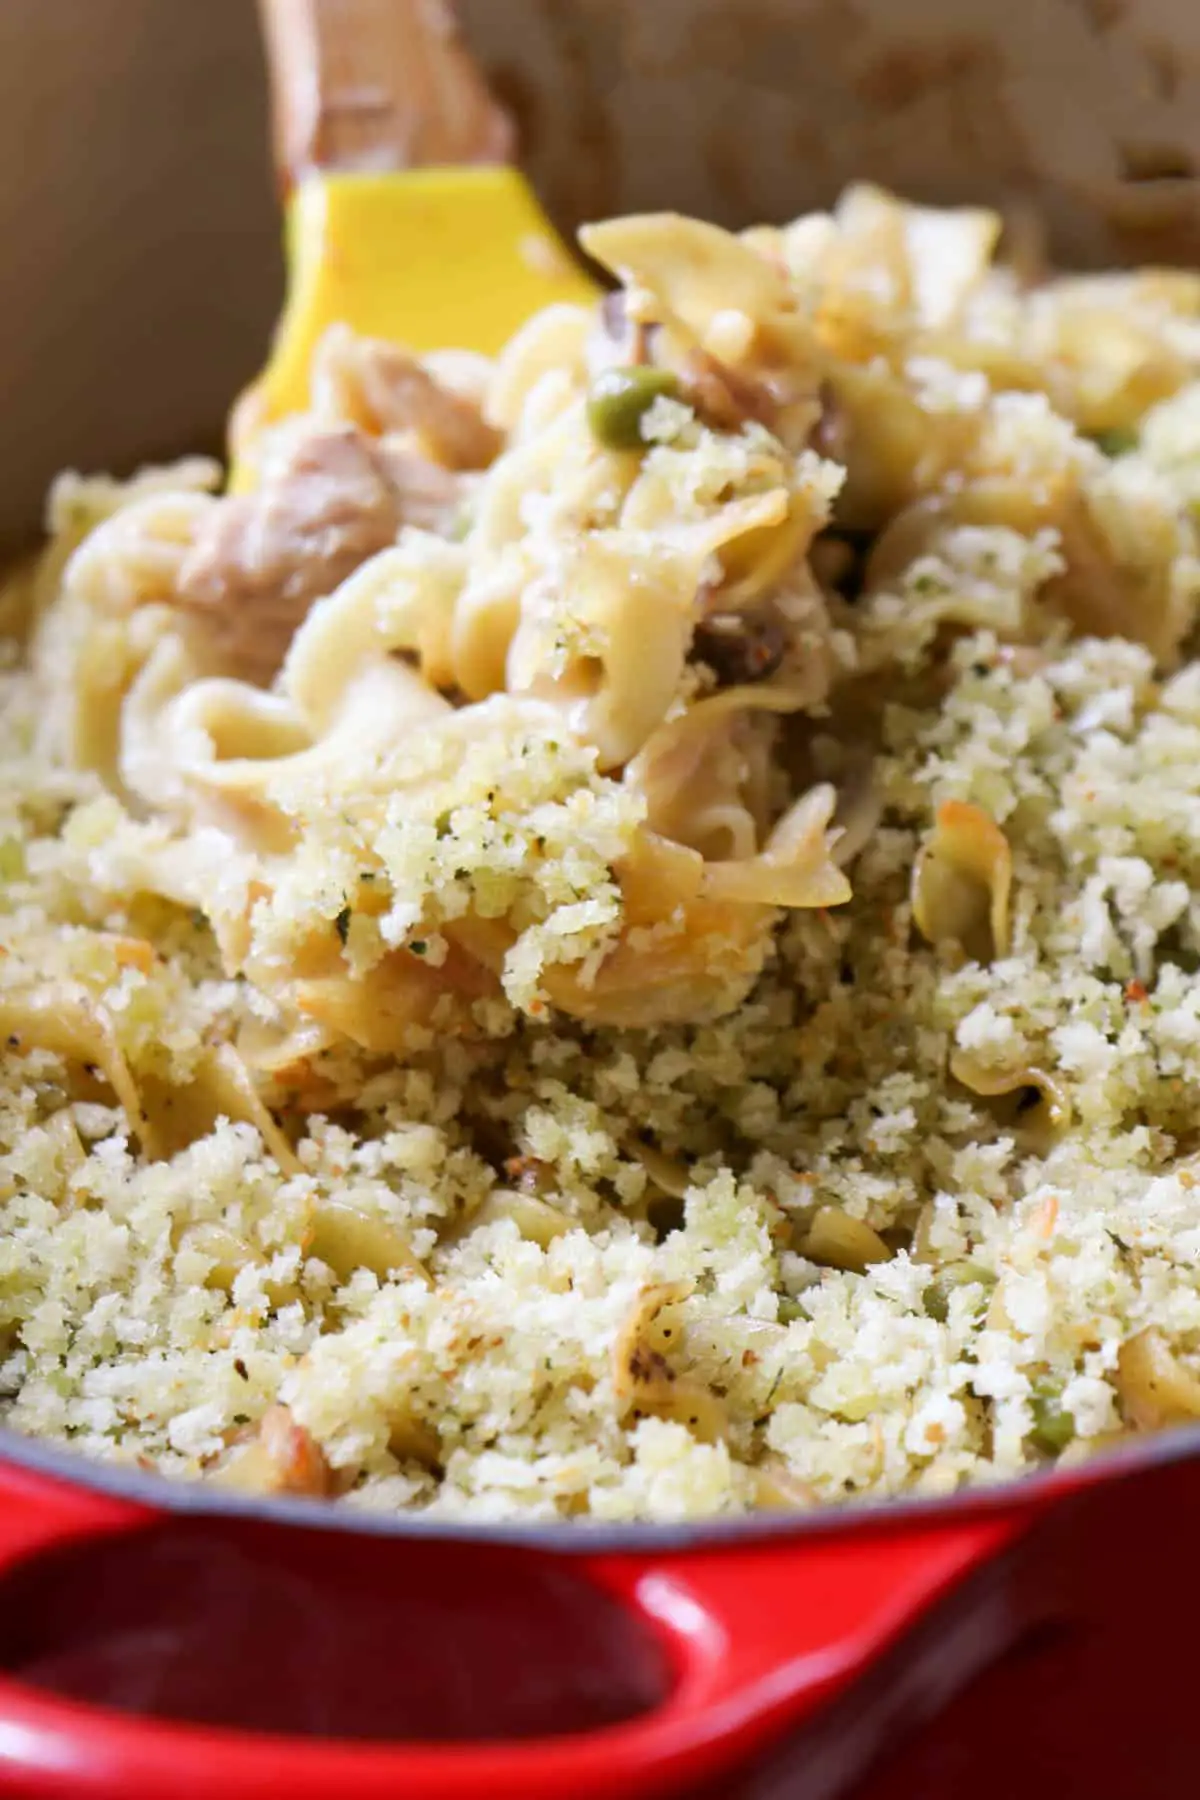 Noodles cooked with tuna and peas in a creamy sauce with a panko topping and a yellow spoon cradling some of the tuna noodle casserole which is in a red handled Dutch oven.